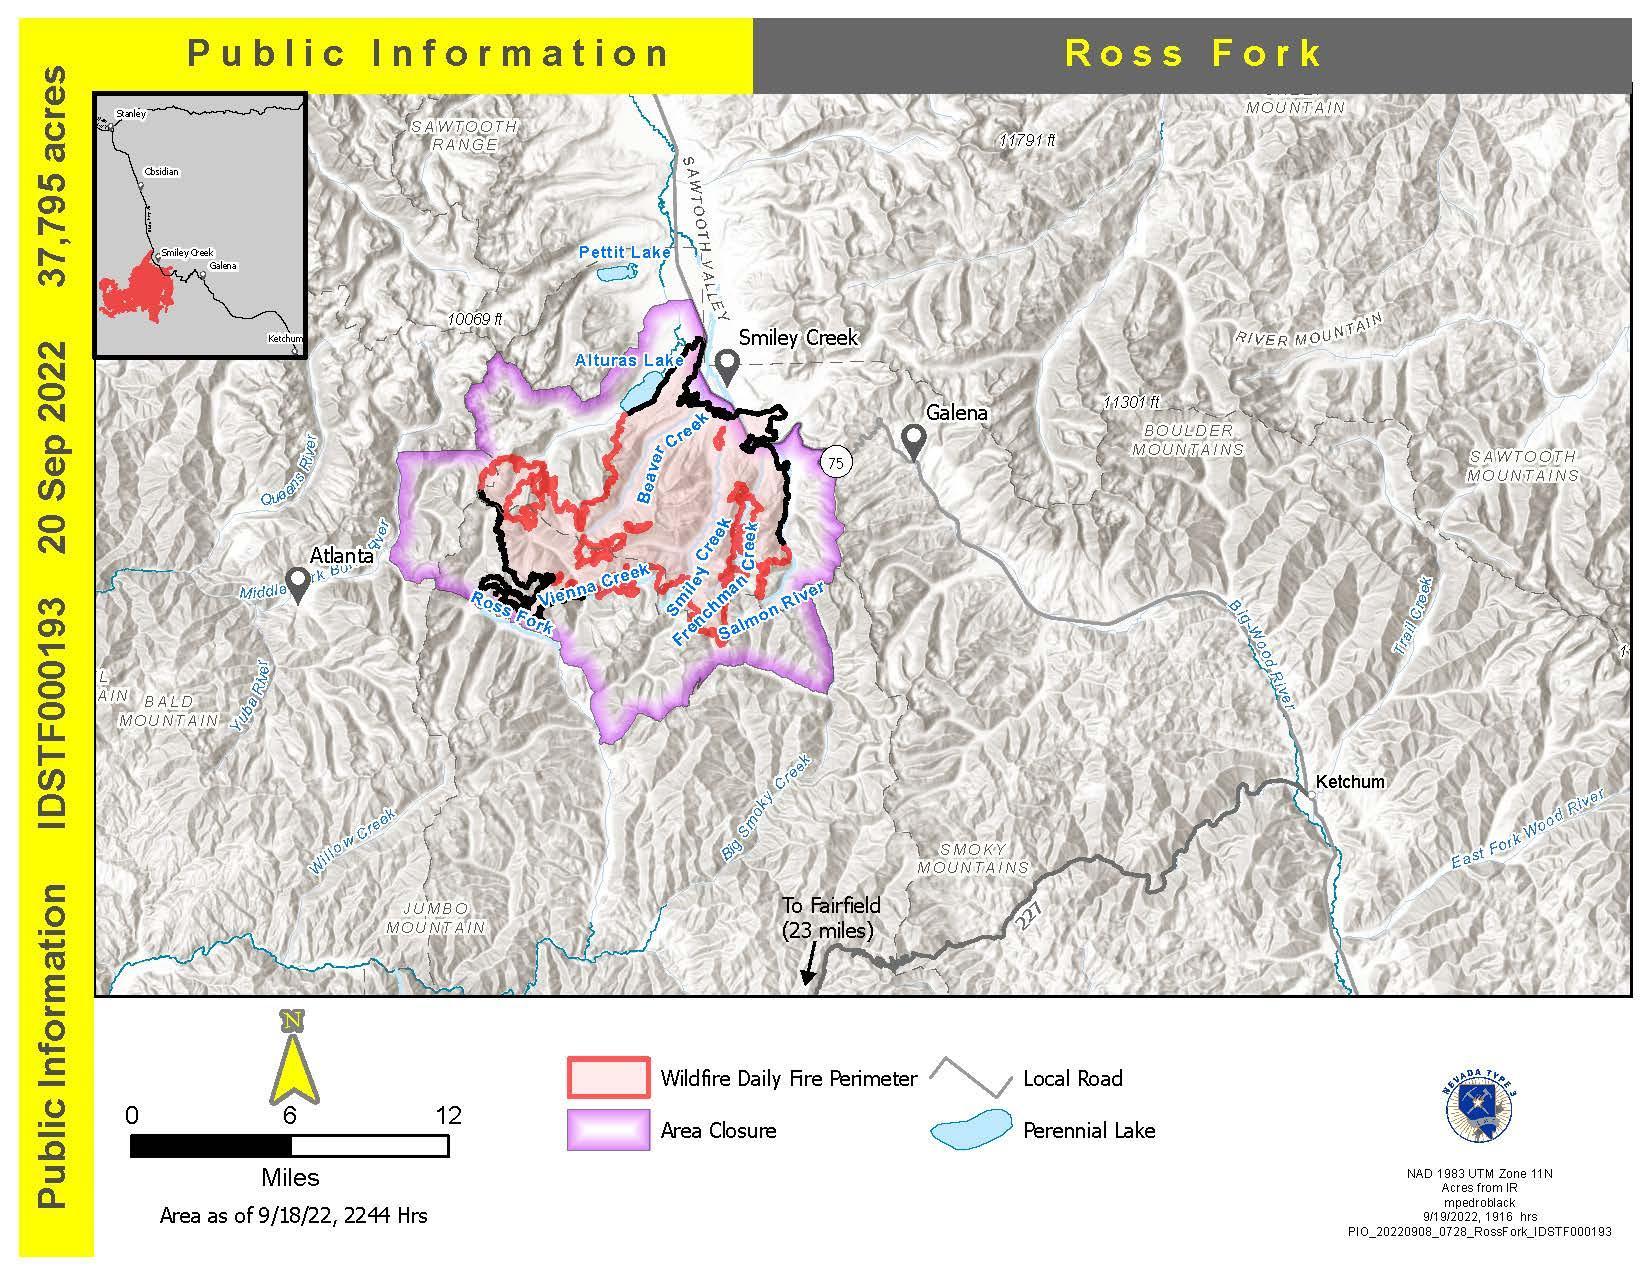 Ross Fork Fire information map, Tuesday, 9-20